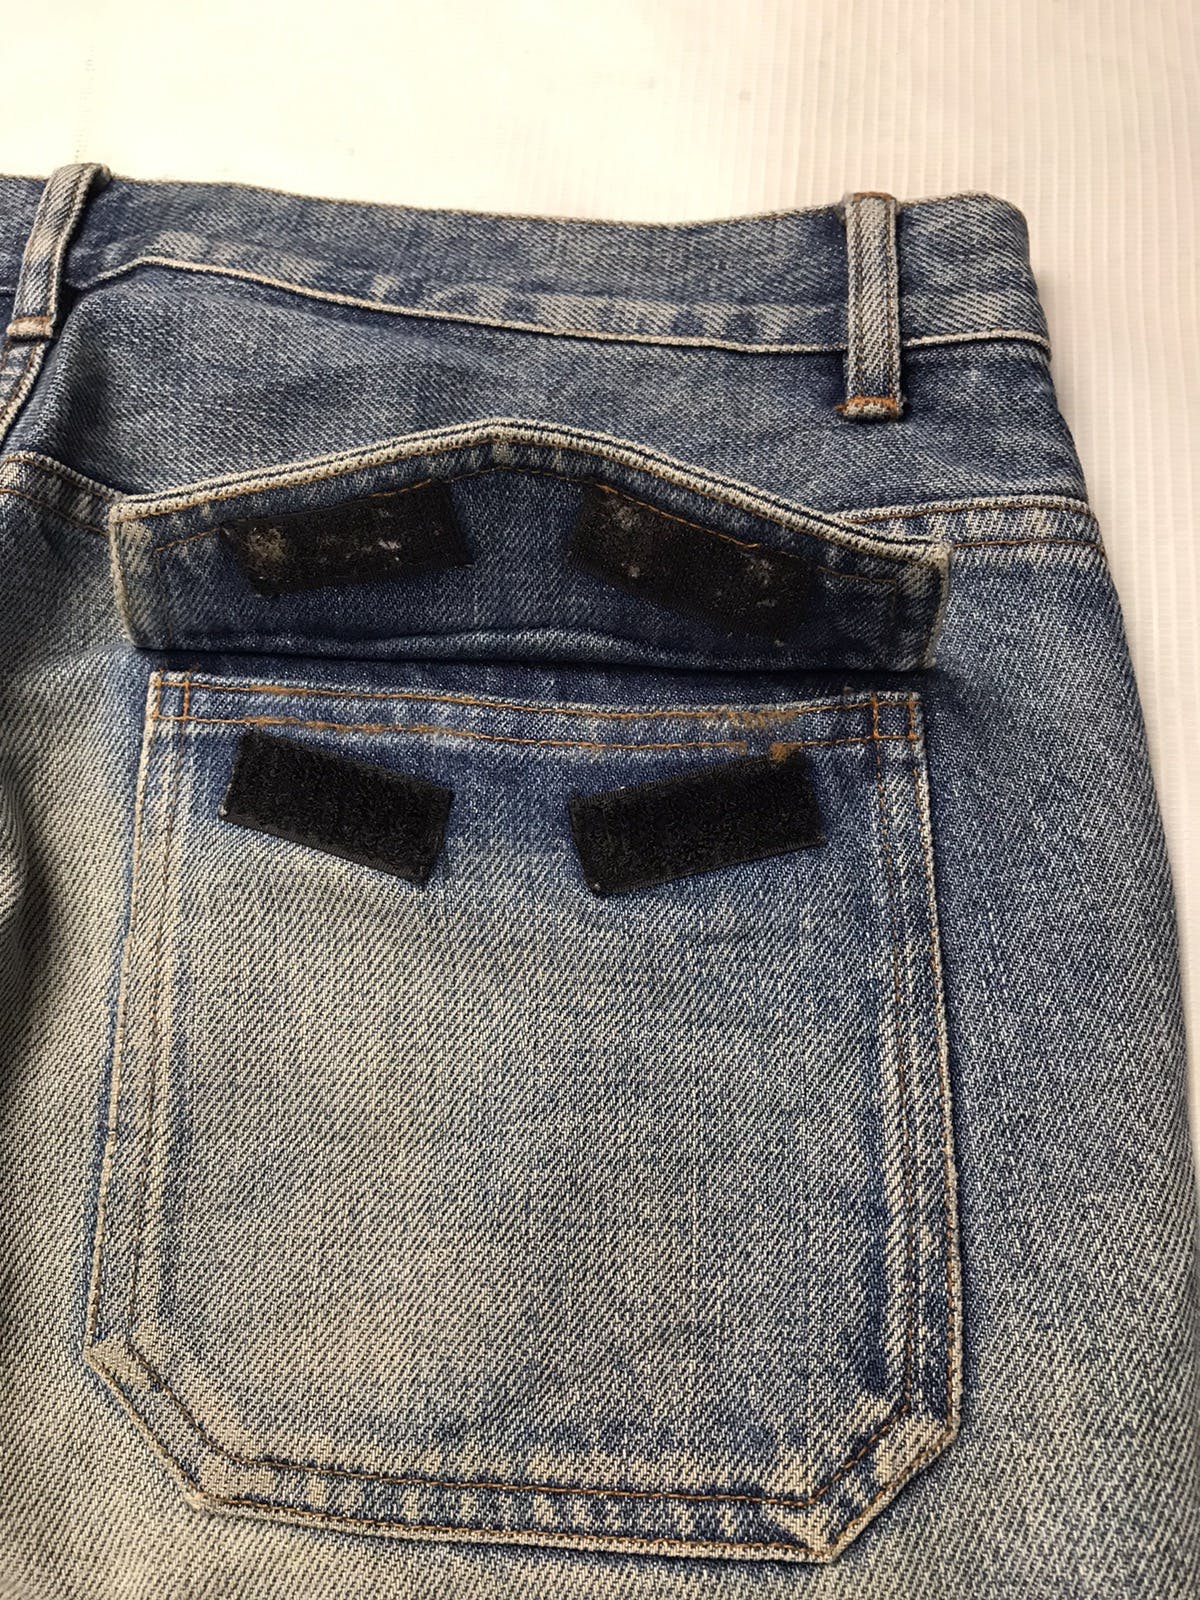 Rare!! A.P.C patch pocket distressed denim Made in Japan - 15